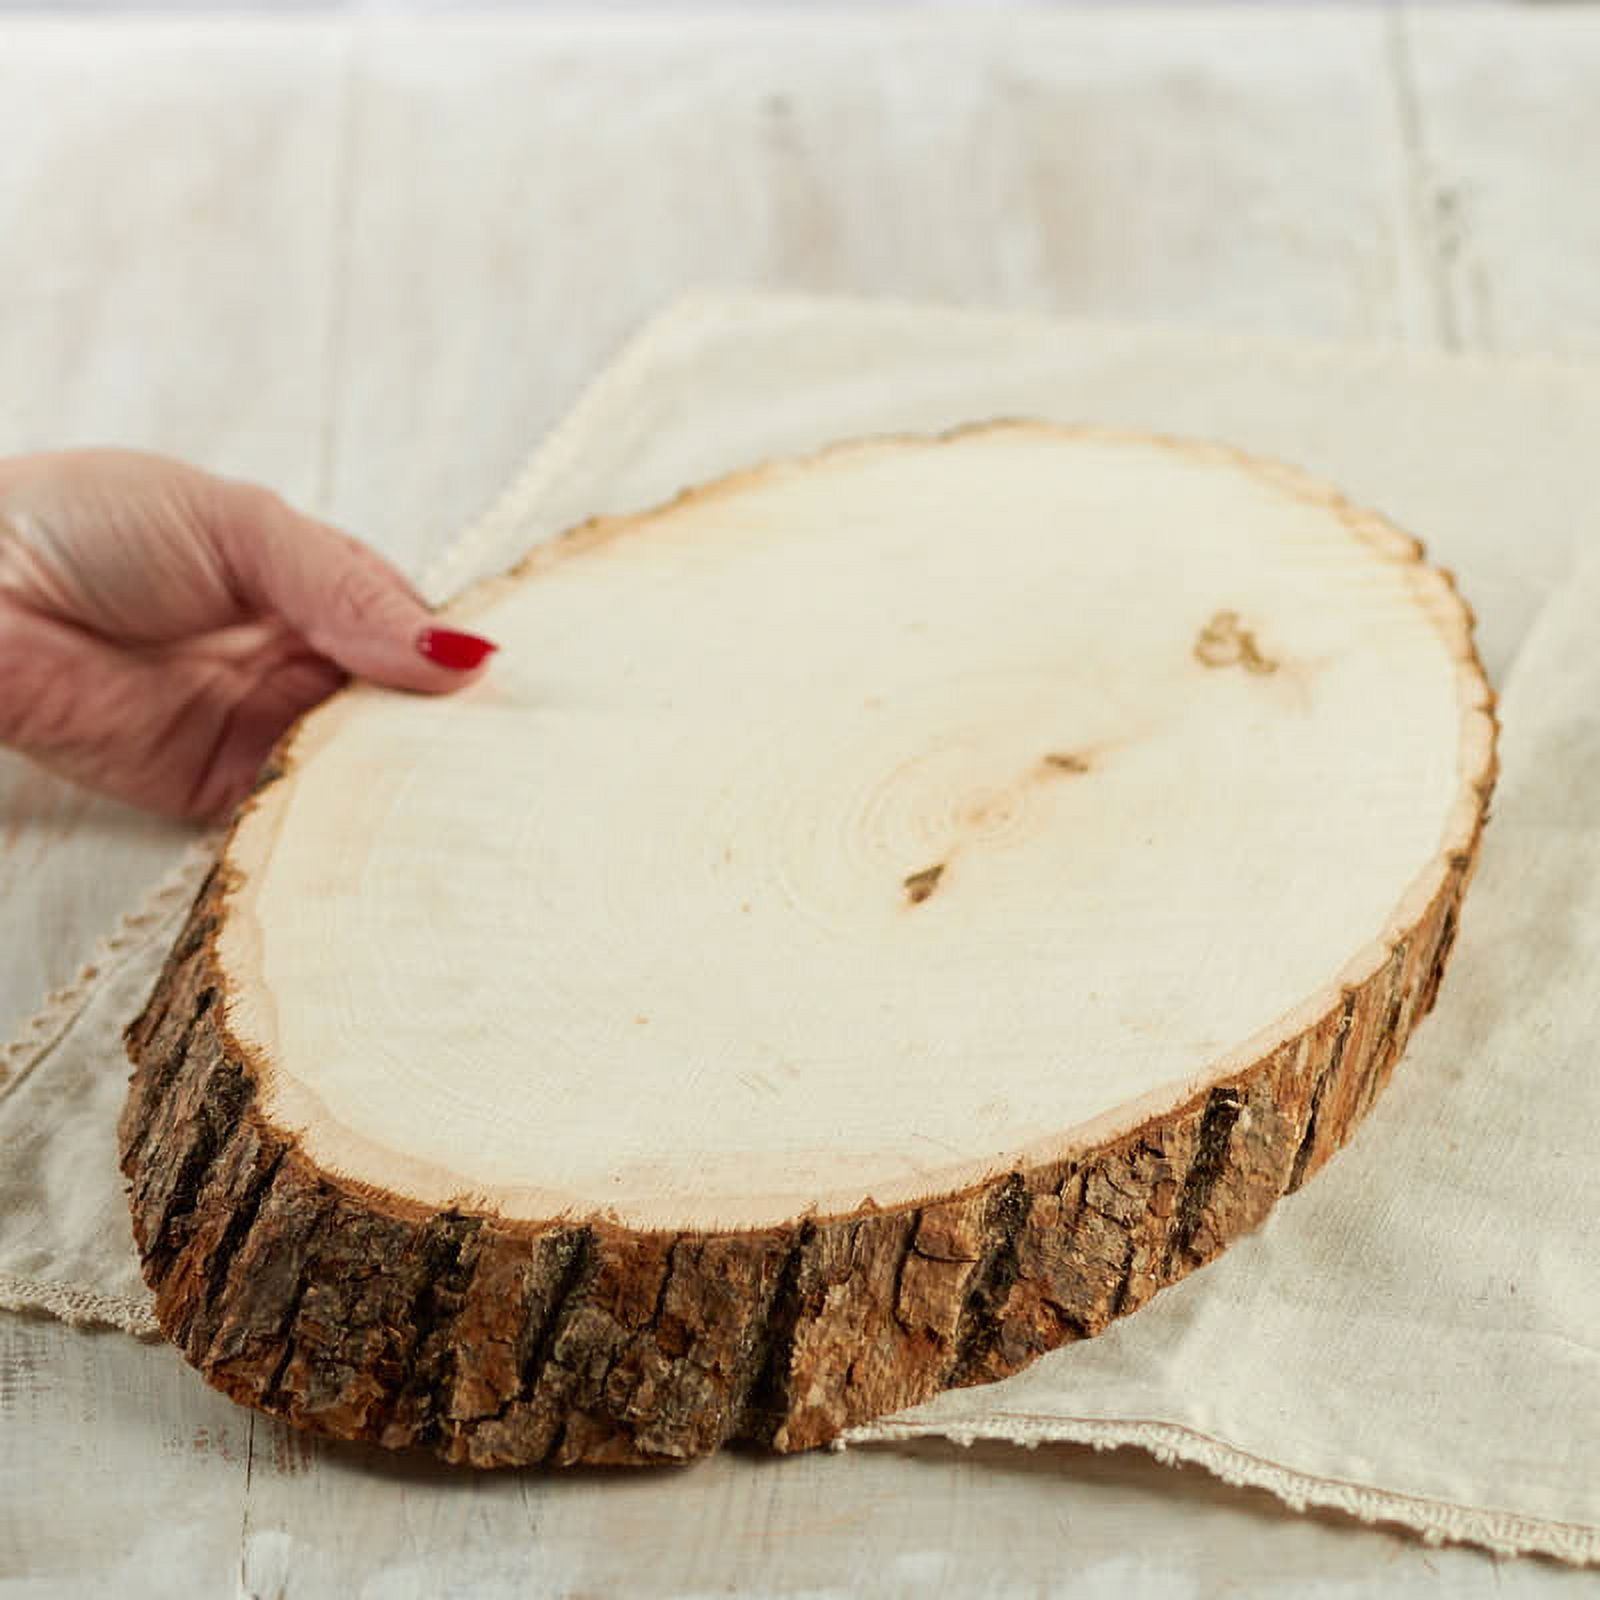 10 Pcs Oval Natural Wood Slices, Length 12 inch and Width 3.9-4.7 inch Craft Wood Slices, Oval Shaped Unfinished Wood Slices for DIY Christmas